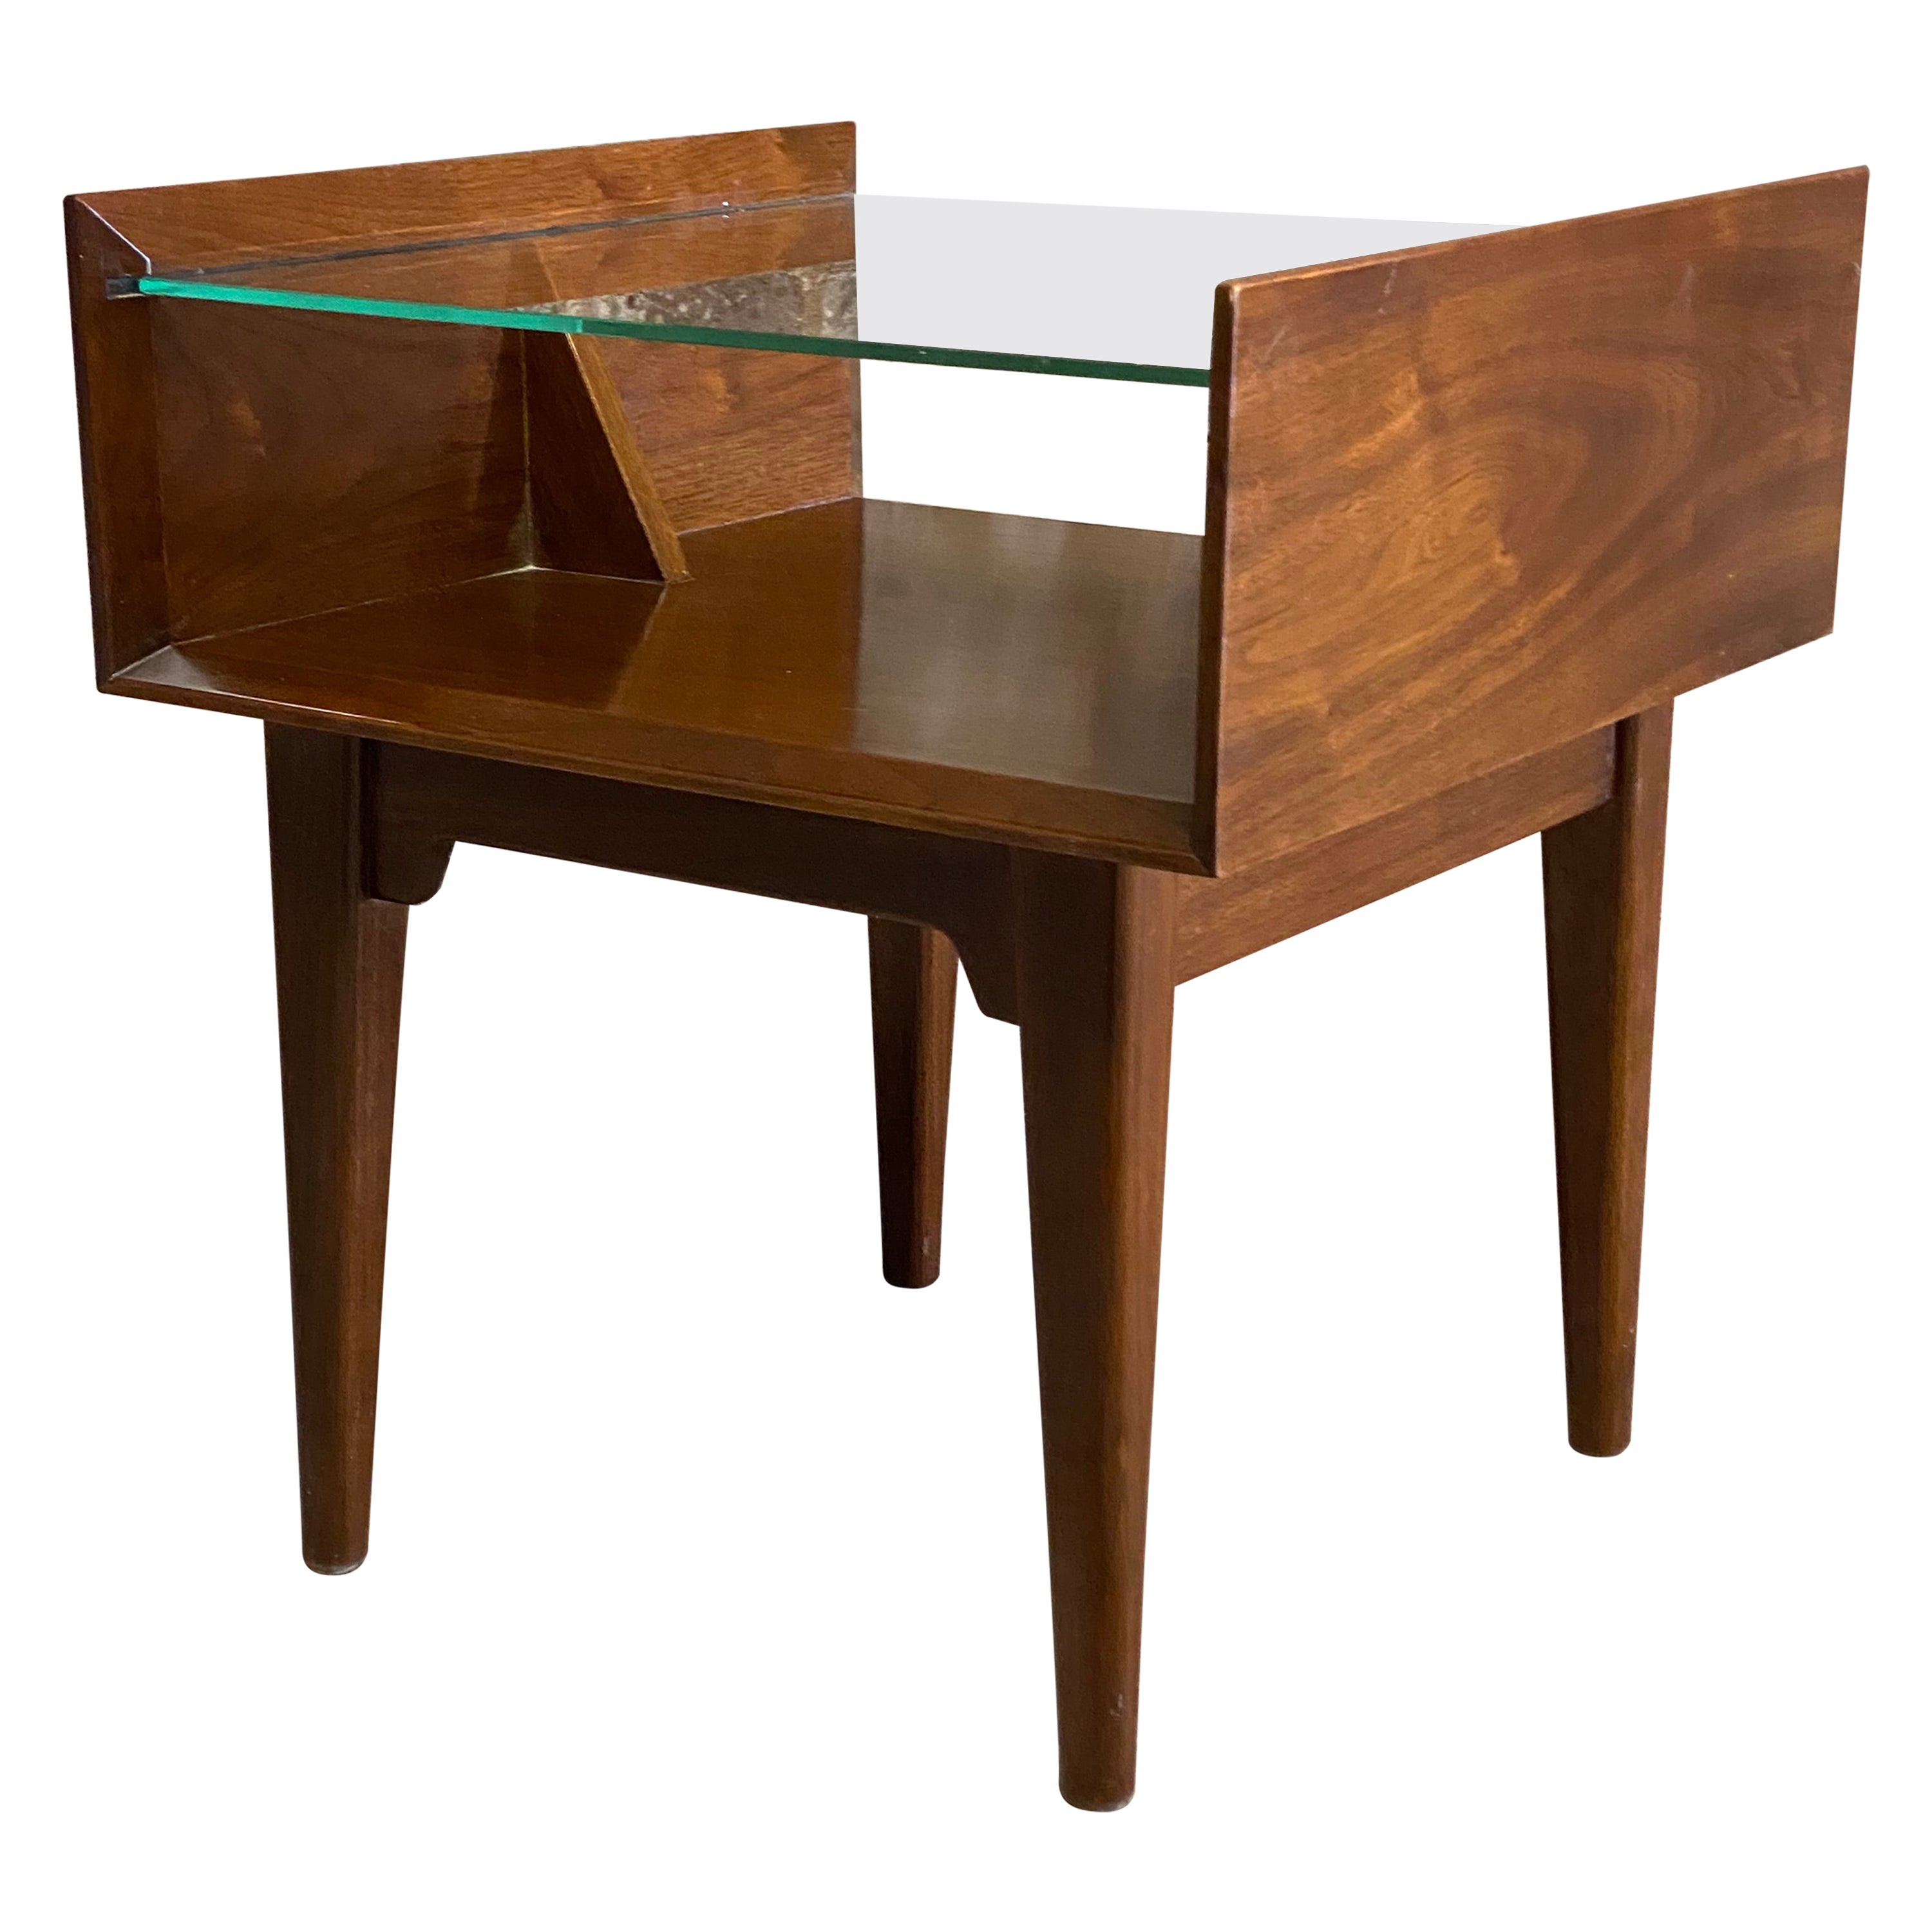 Walnut and Glass Mid-Century Modern End Table